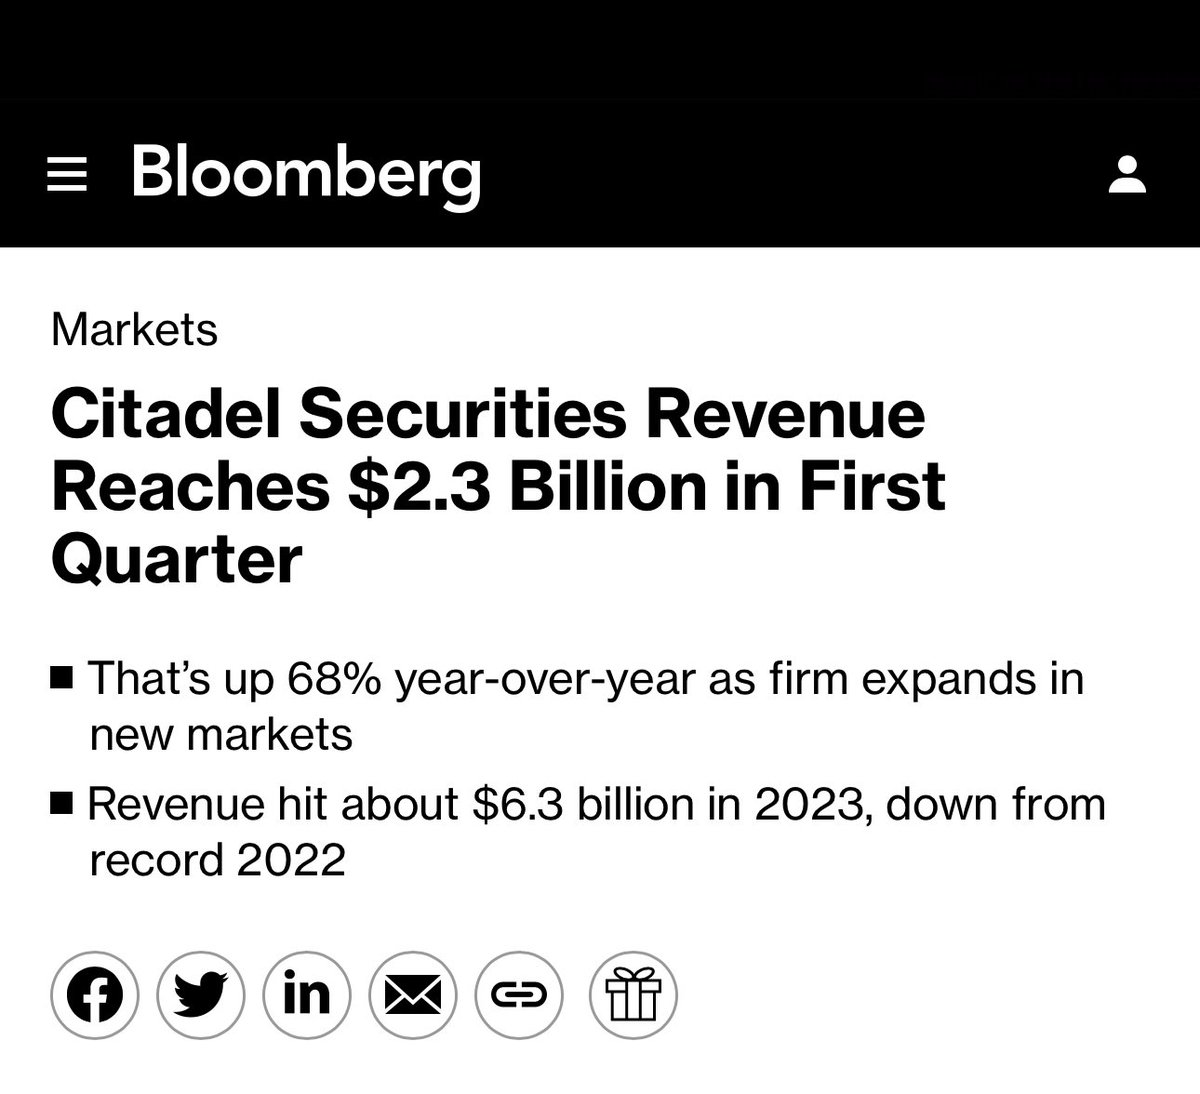 Citadel on track for record setting year 'Citadel Securities generated $2.3 billion of net trading revenue in the first three months of 2024, setting the market-making firm up for a potentially record year as it expands in new assets classes and geographies. The trading haul is